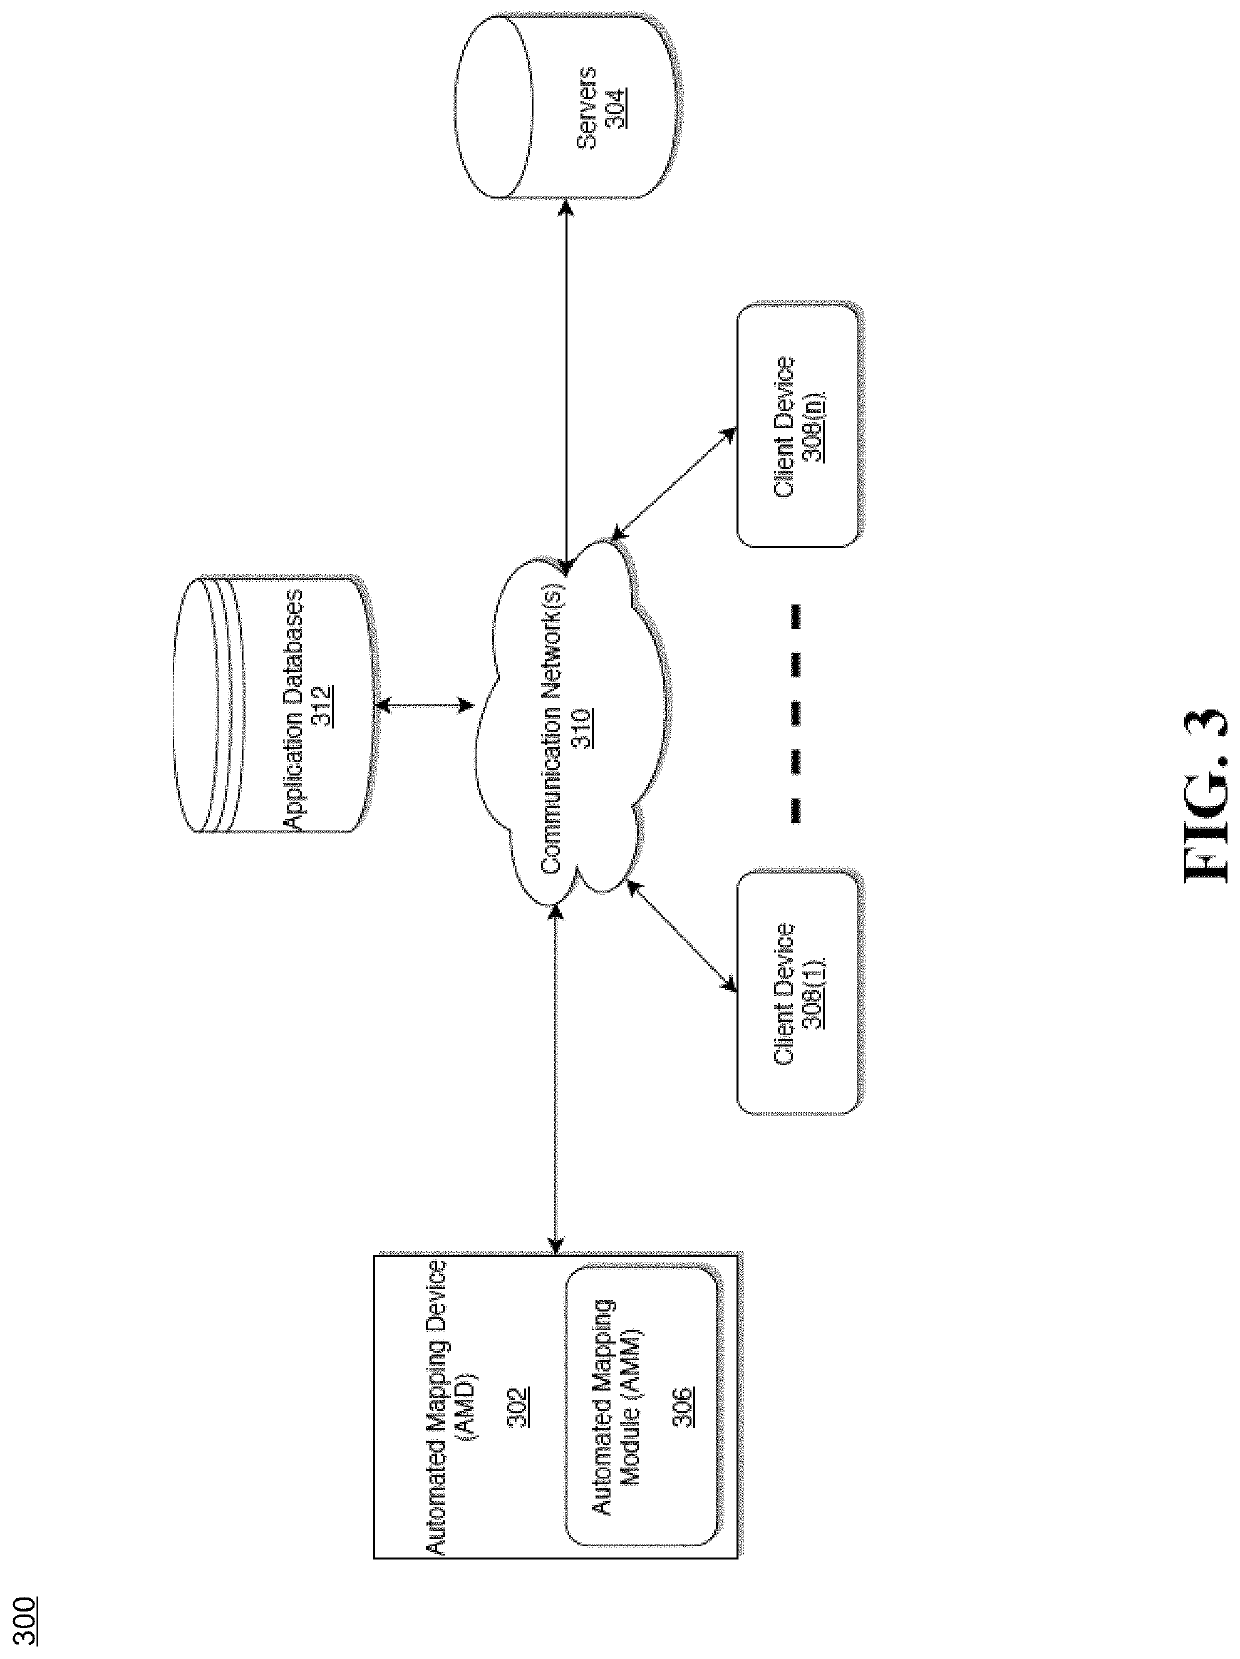 Method and apparatus for automatically mapping physical data models/objects to logical data models and business terms